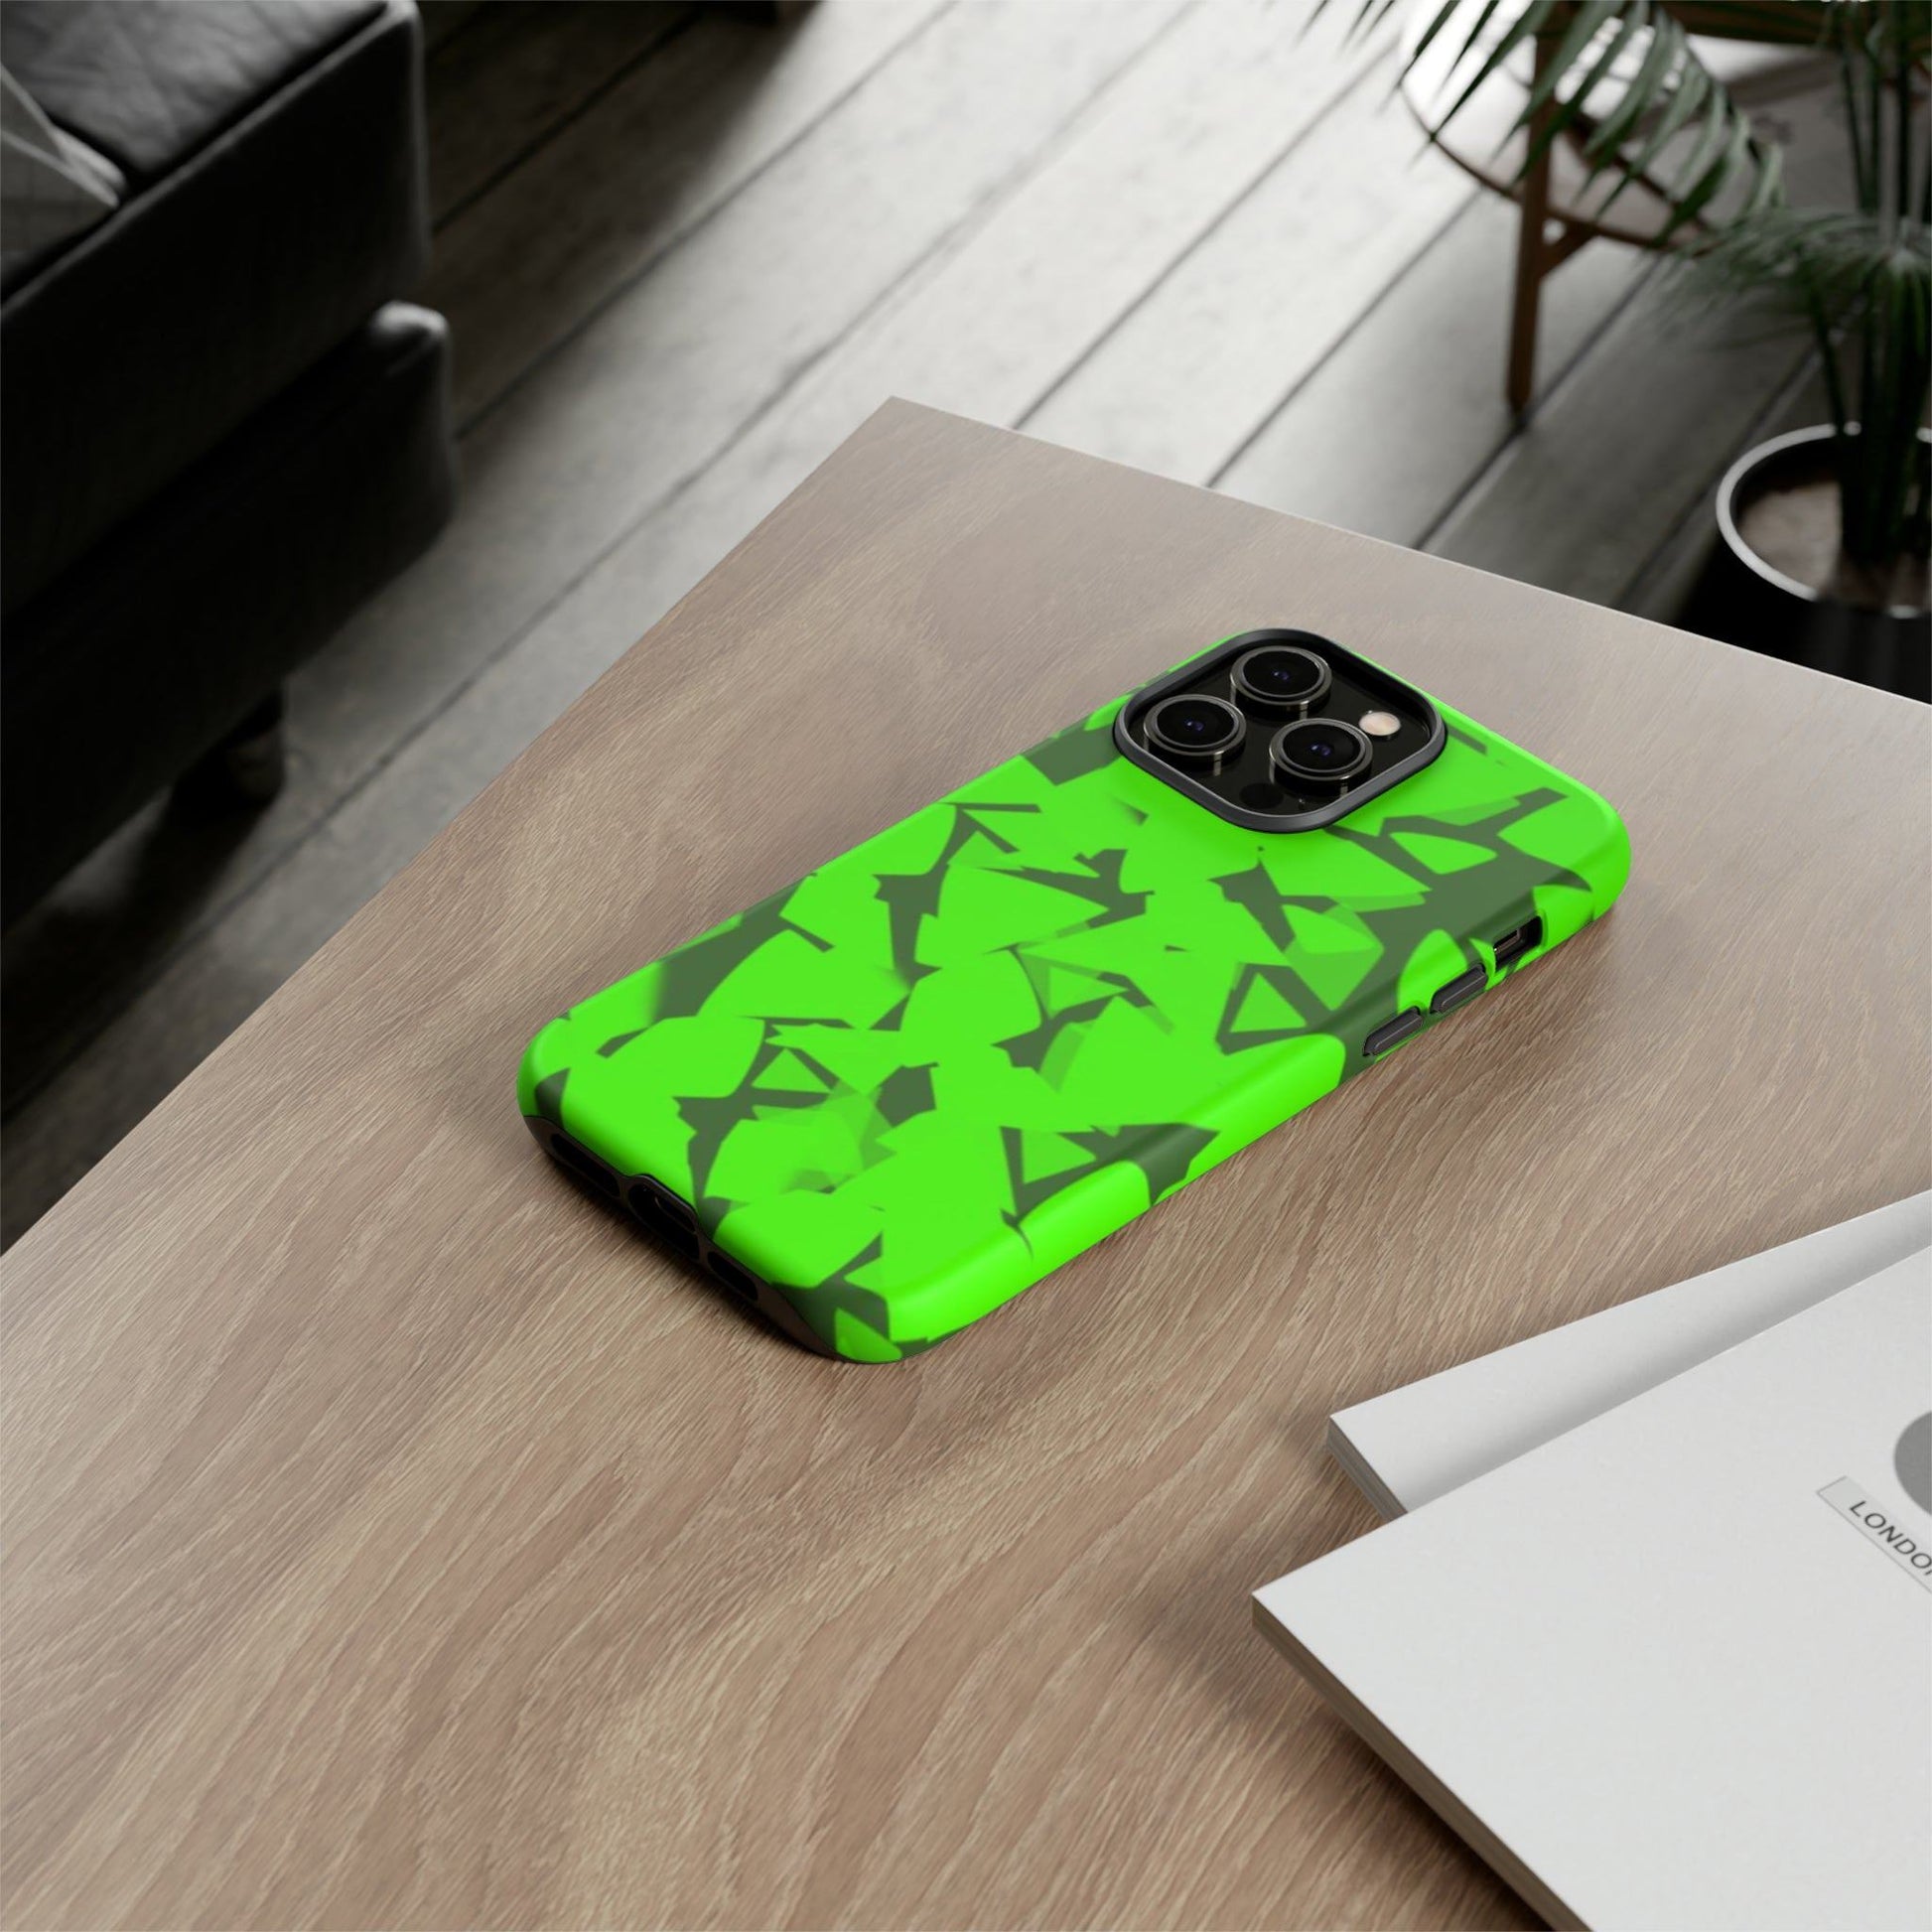 Apple Iphone Crystal Lime Cover -- Apple Iphone Crystal Lime Cover - undefined Phone Case | JLR Design